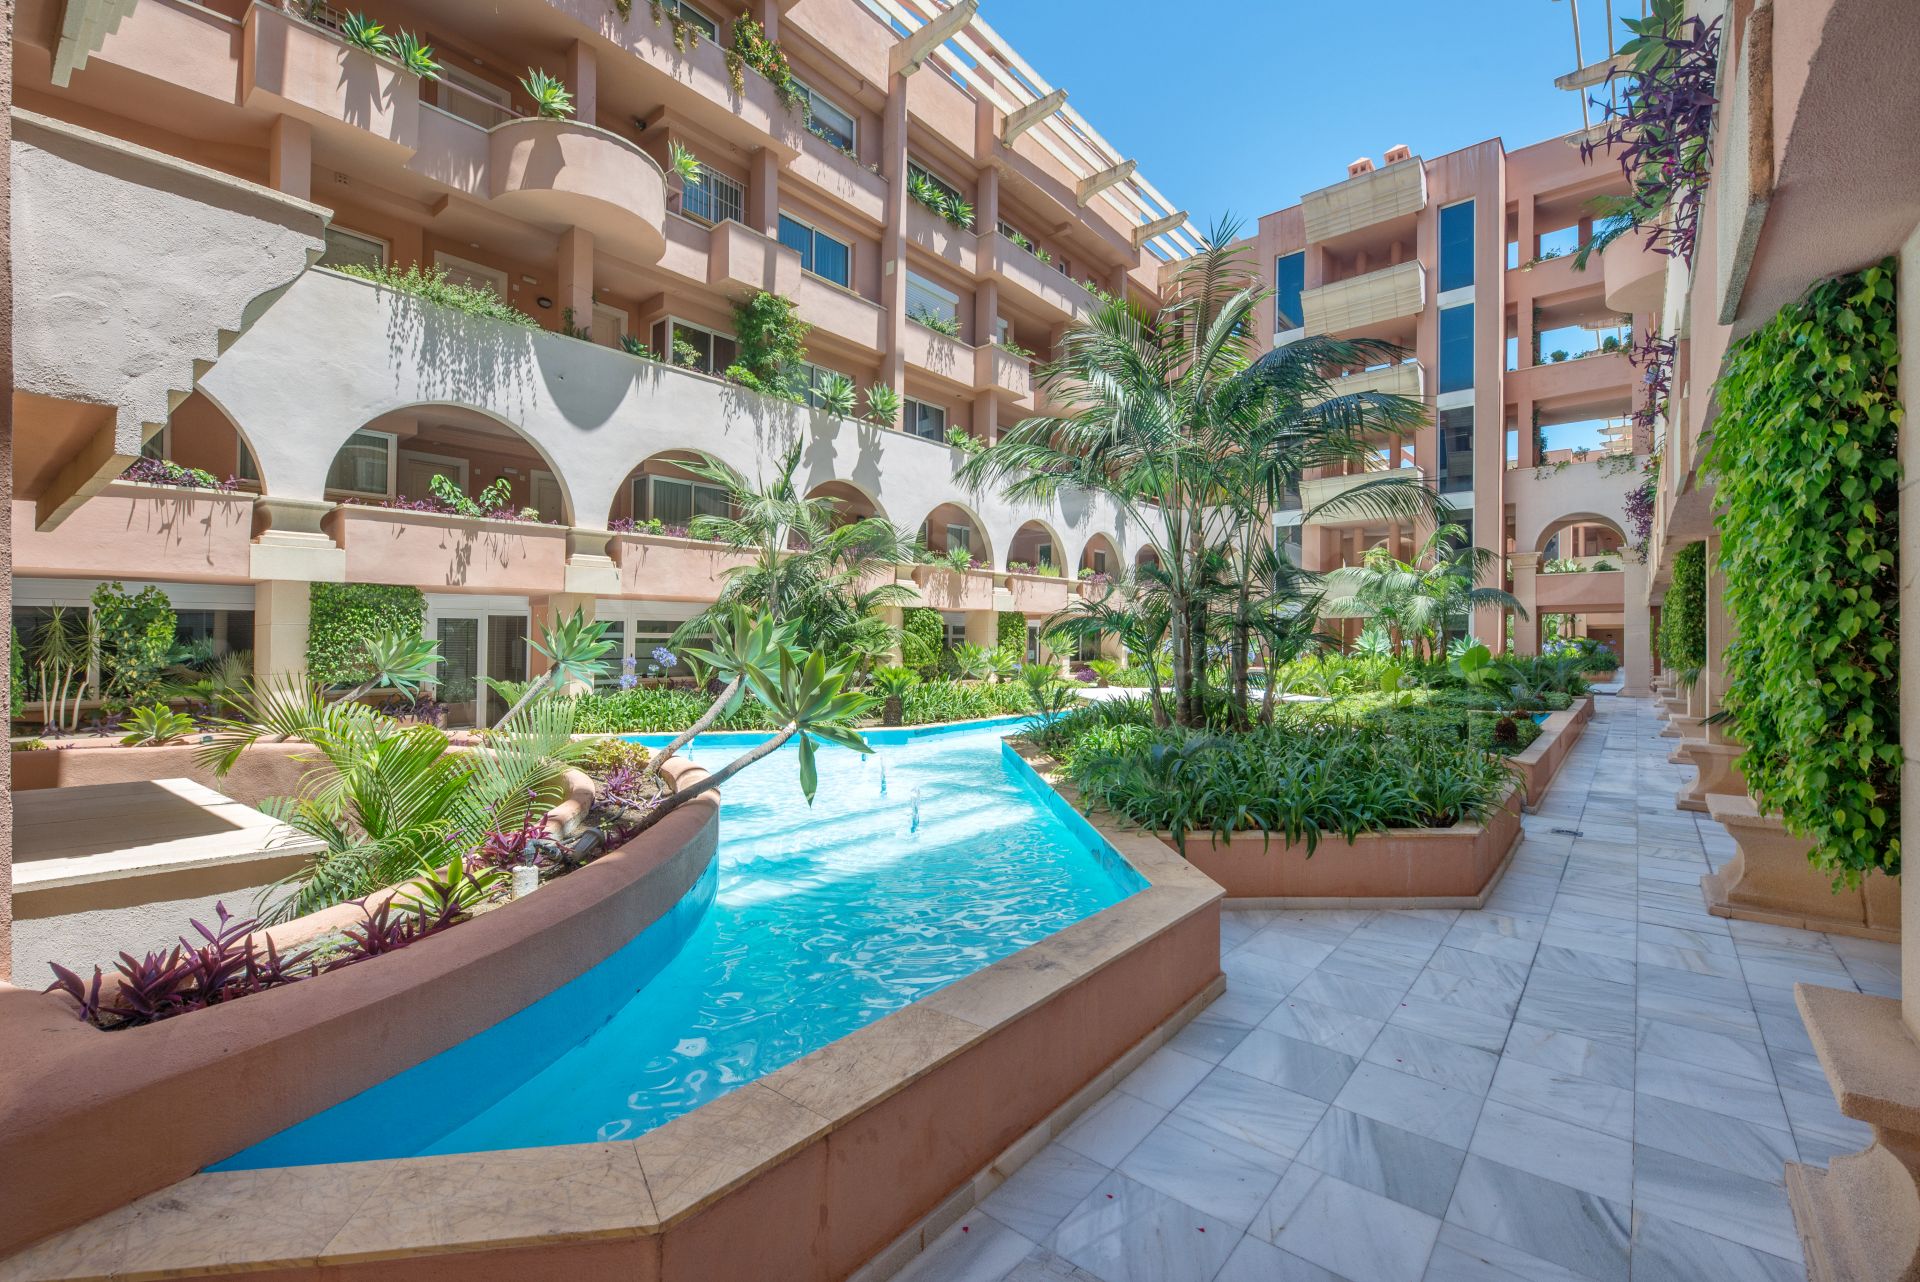 Splendid stylish apartment with 4 bedrooms in Magna Marbella, Nueva Andalucía.